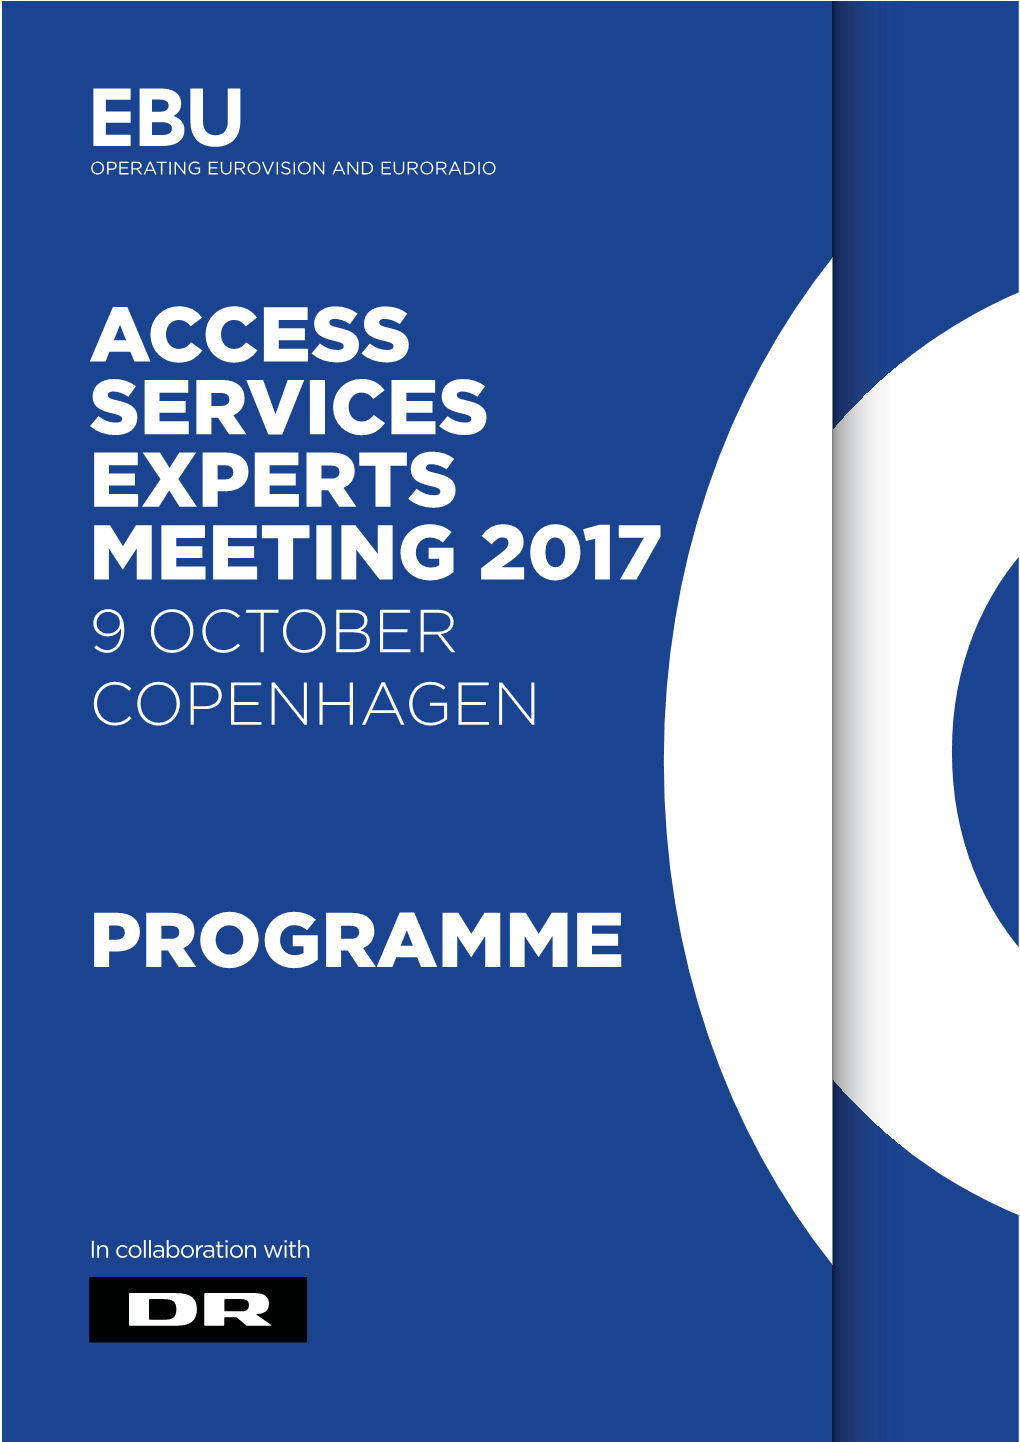 Access Services Experts Meeting 2017 Programme